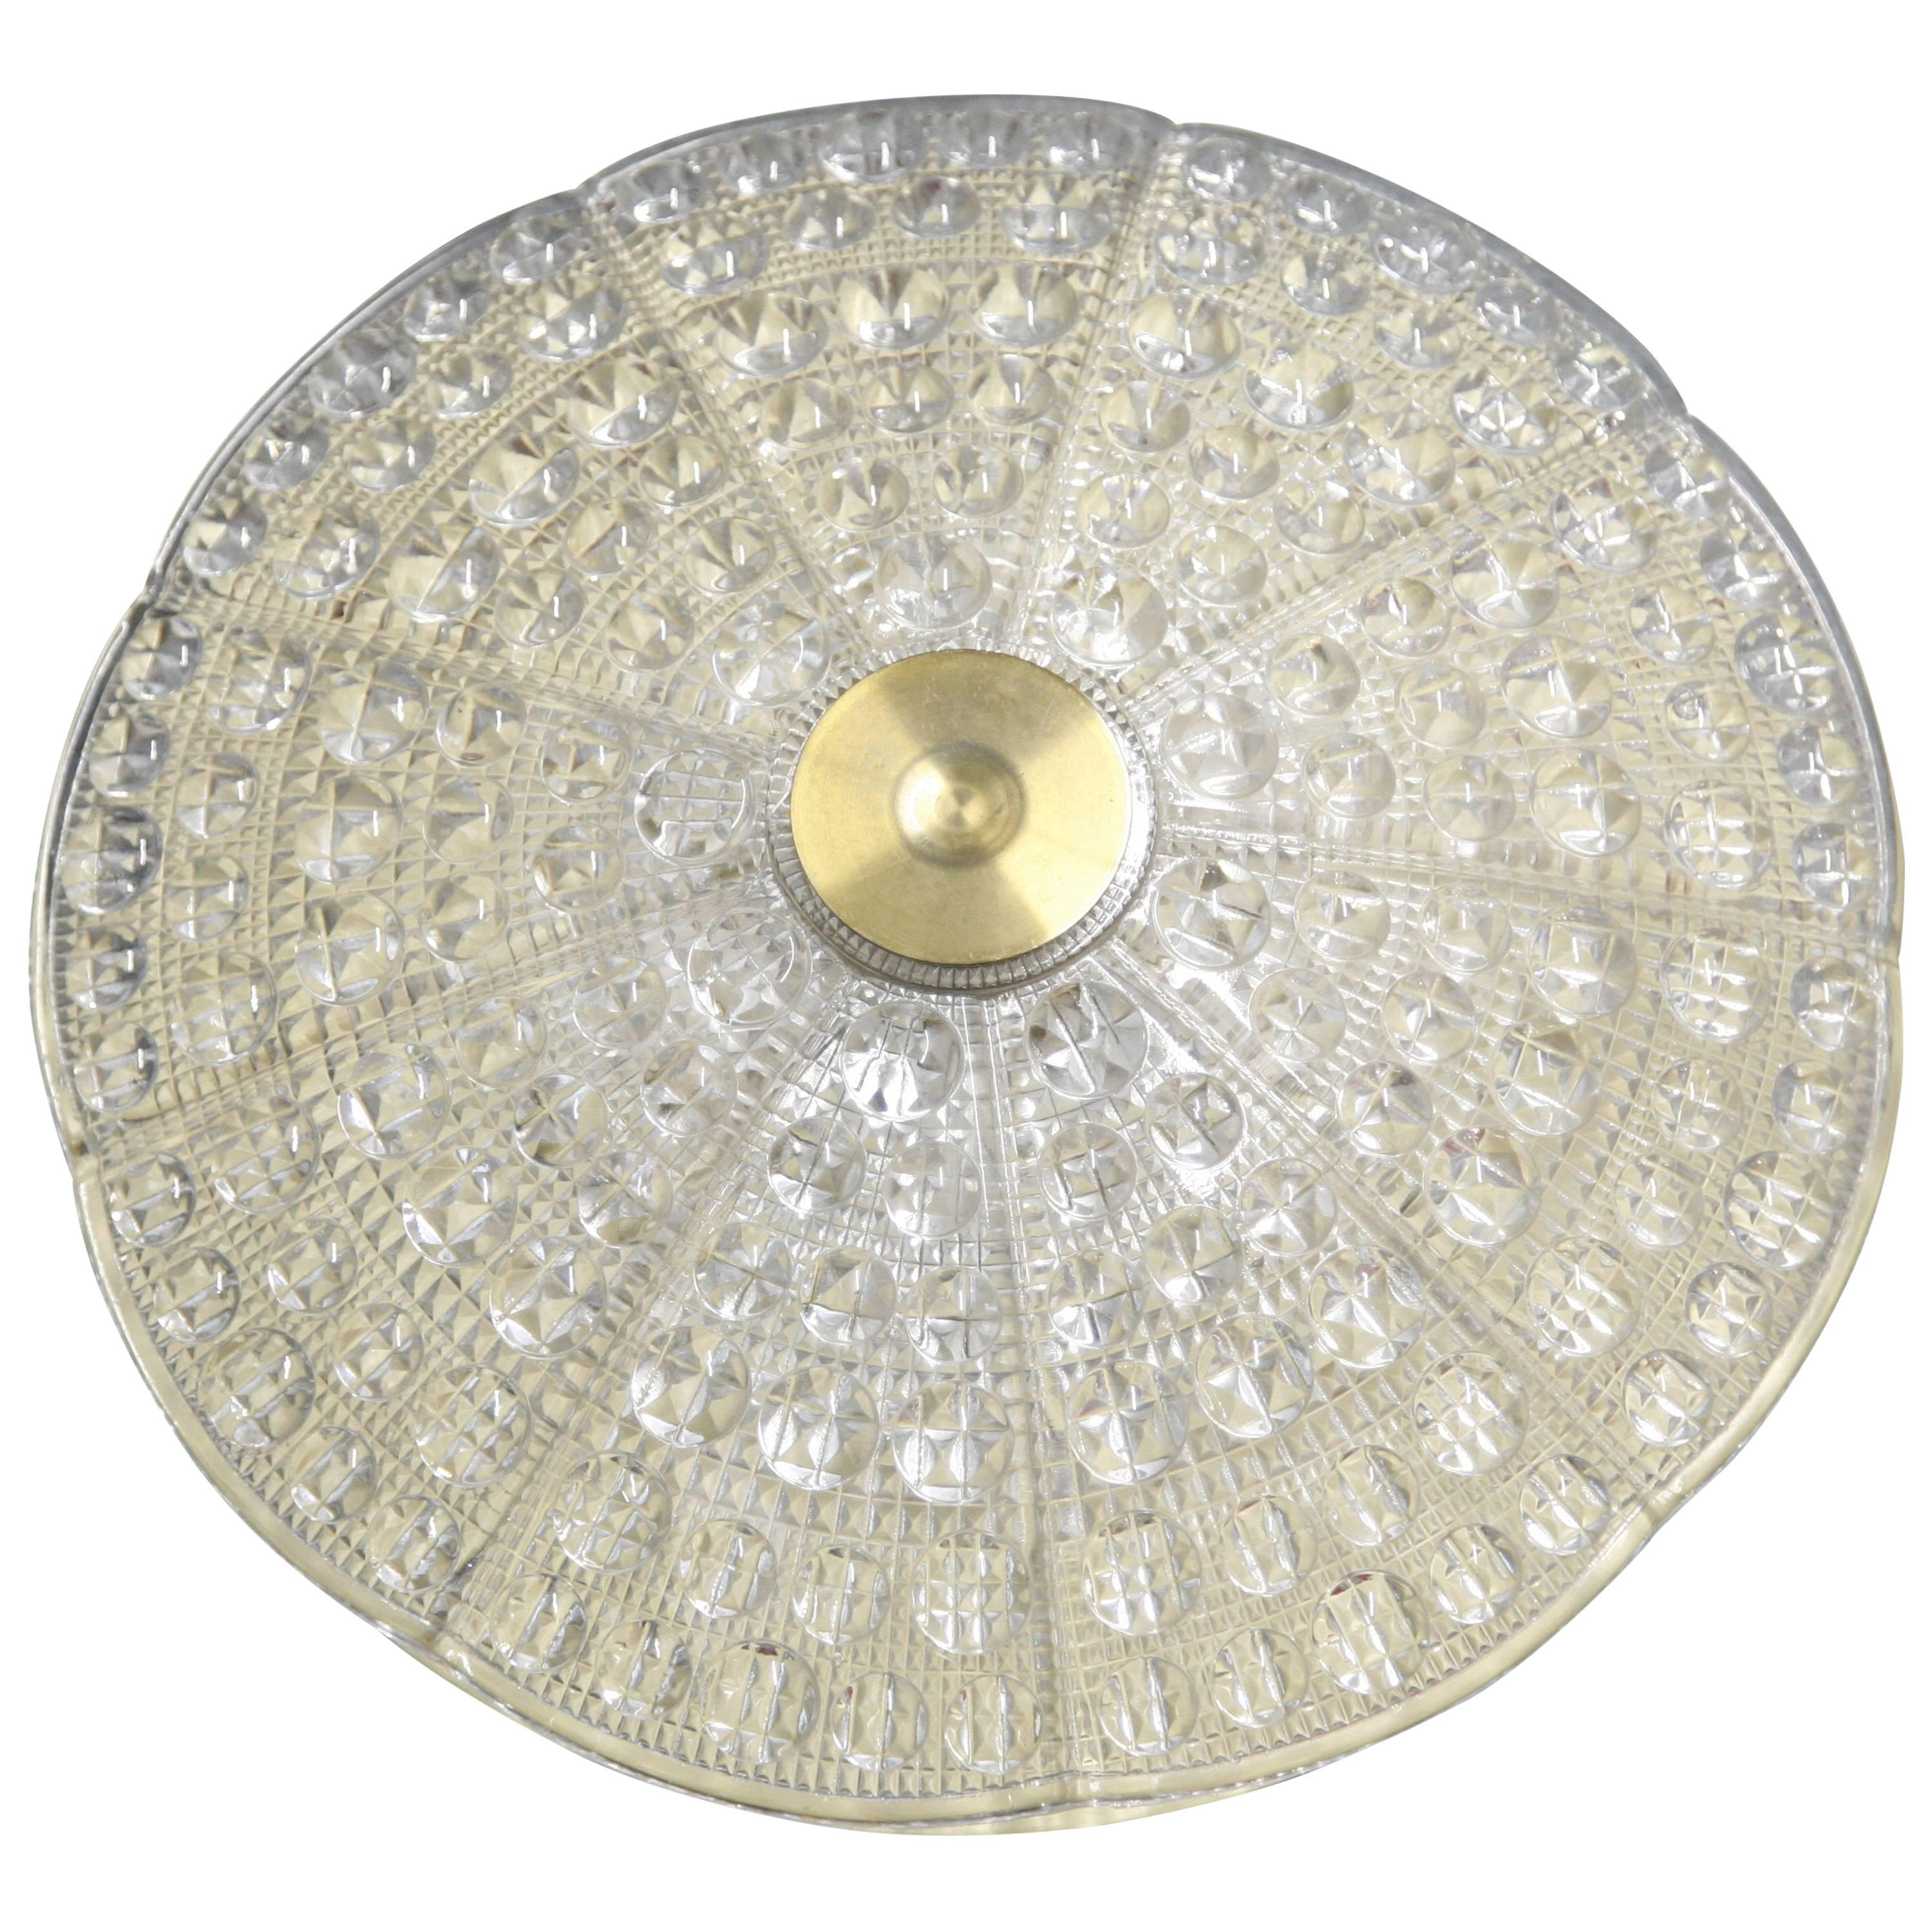 Orrefors Flush Mounts, Crystal and Brass,1960, Sweden in all vintage condition with five European candelabra sockets on a brass frame.
The shade is a thick domed cast crystal with a smooth surface with bubble structure designed by Carl Fagerlund for